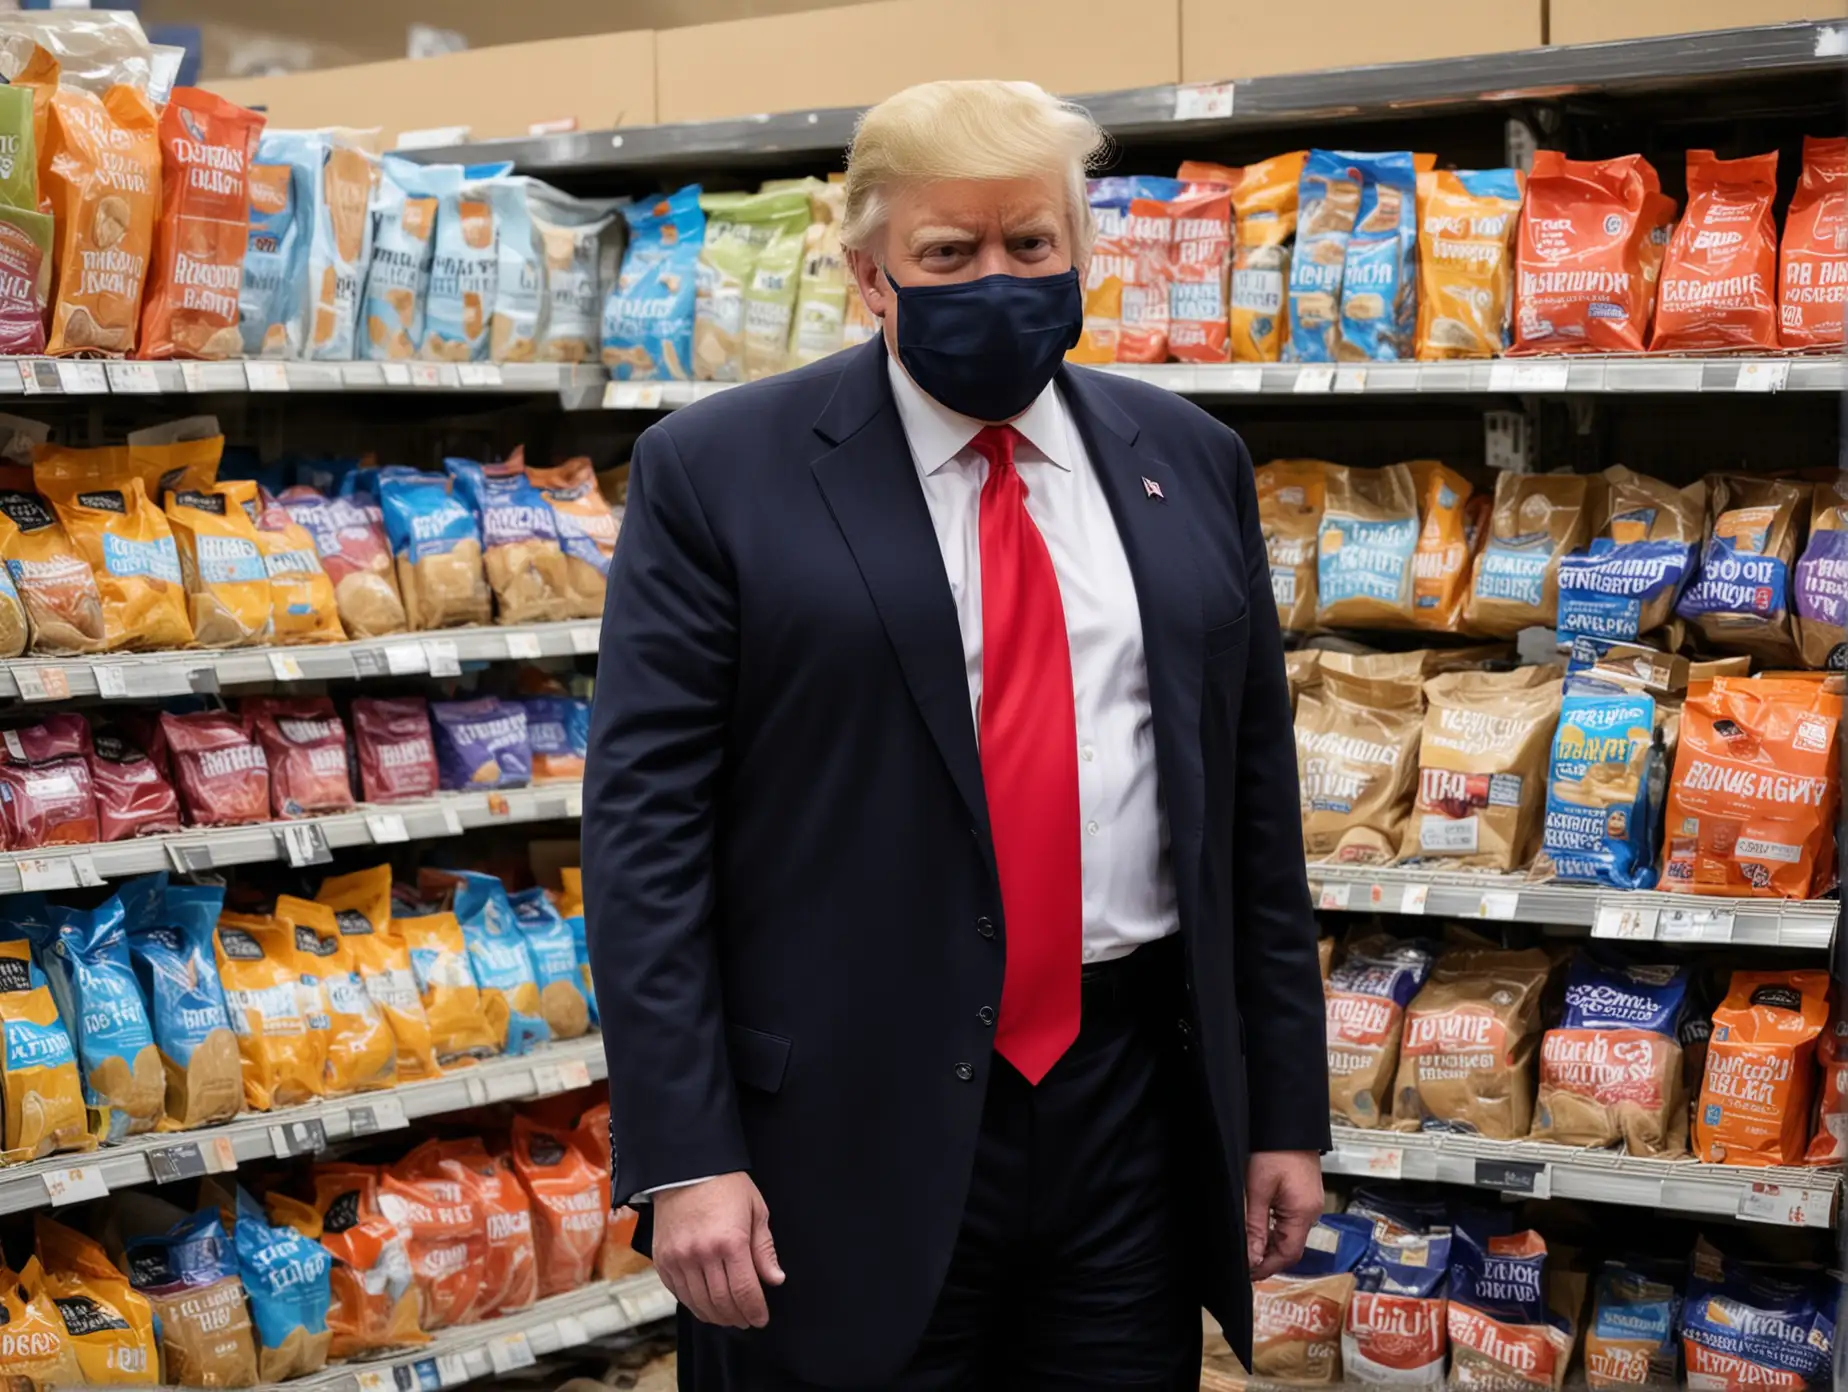 Former President Donald Trump Wearing COVID Mask Shopping at the Grocery Store